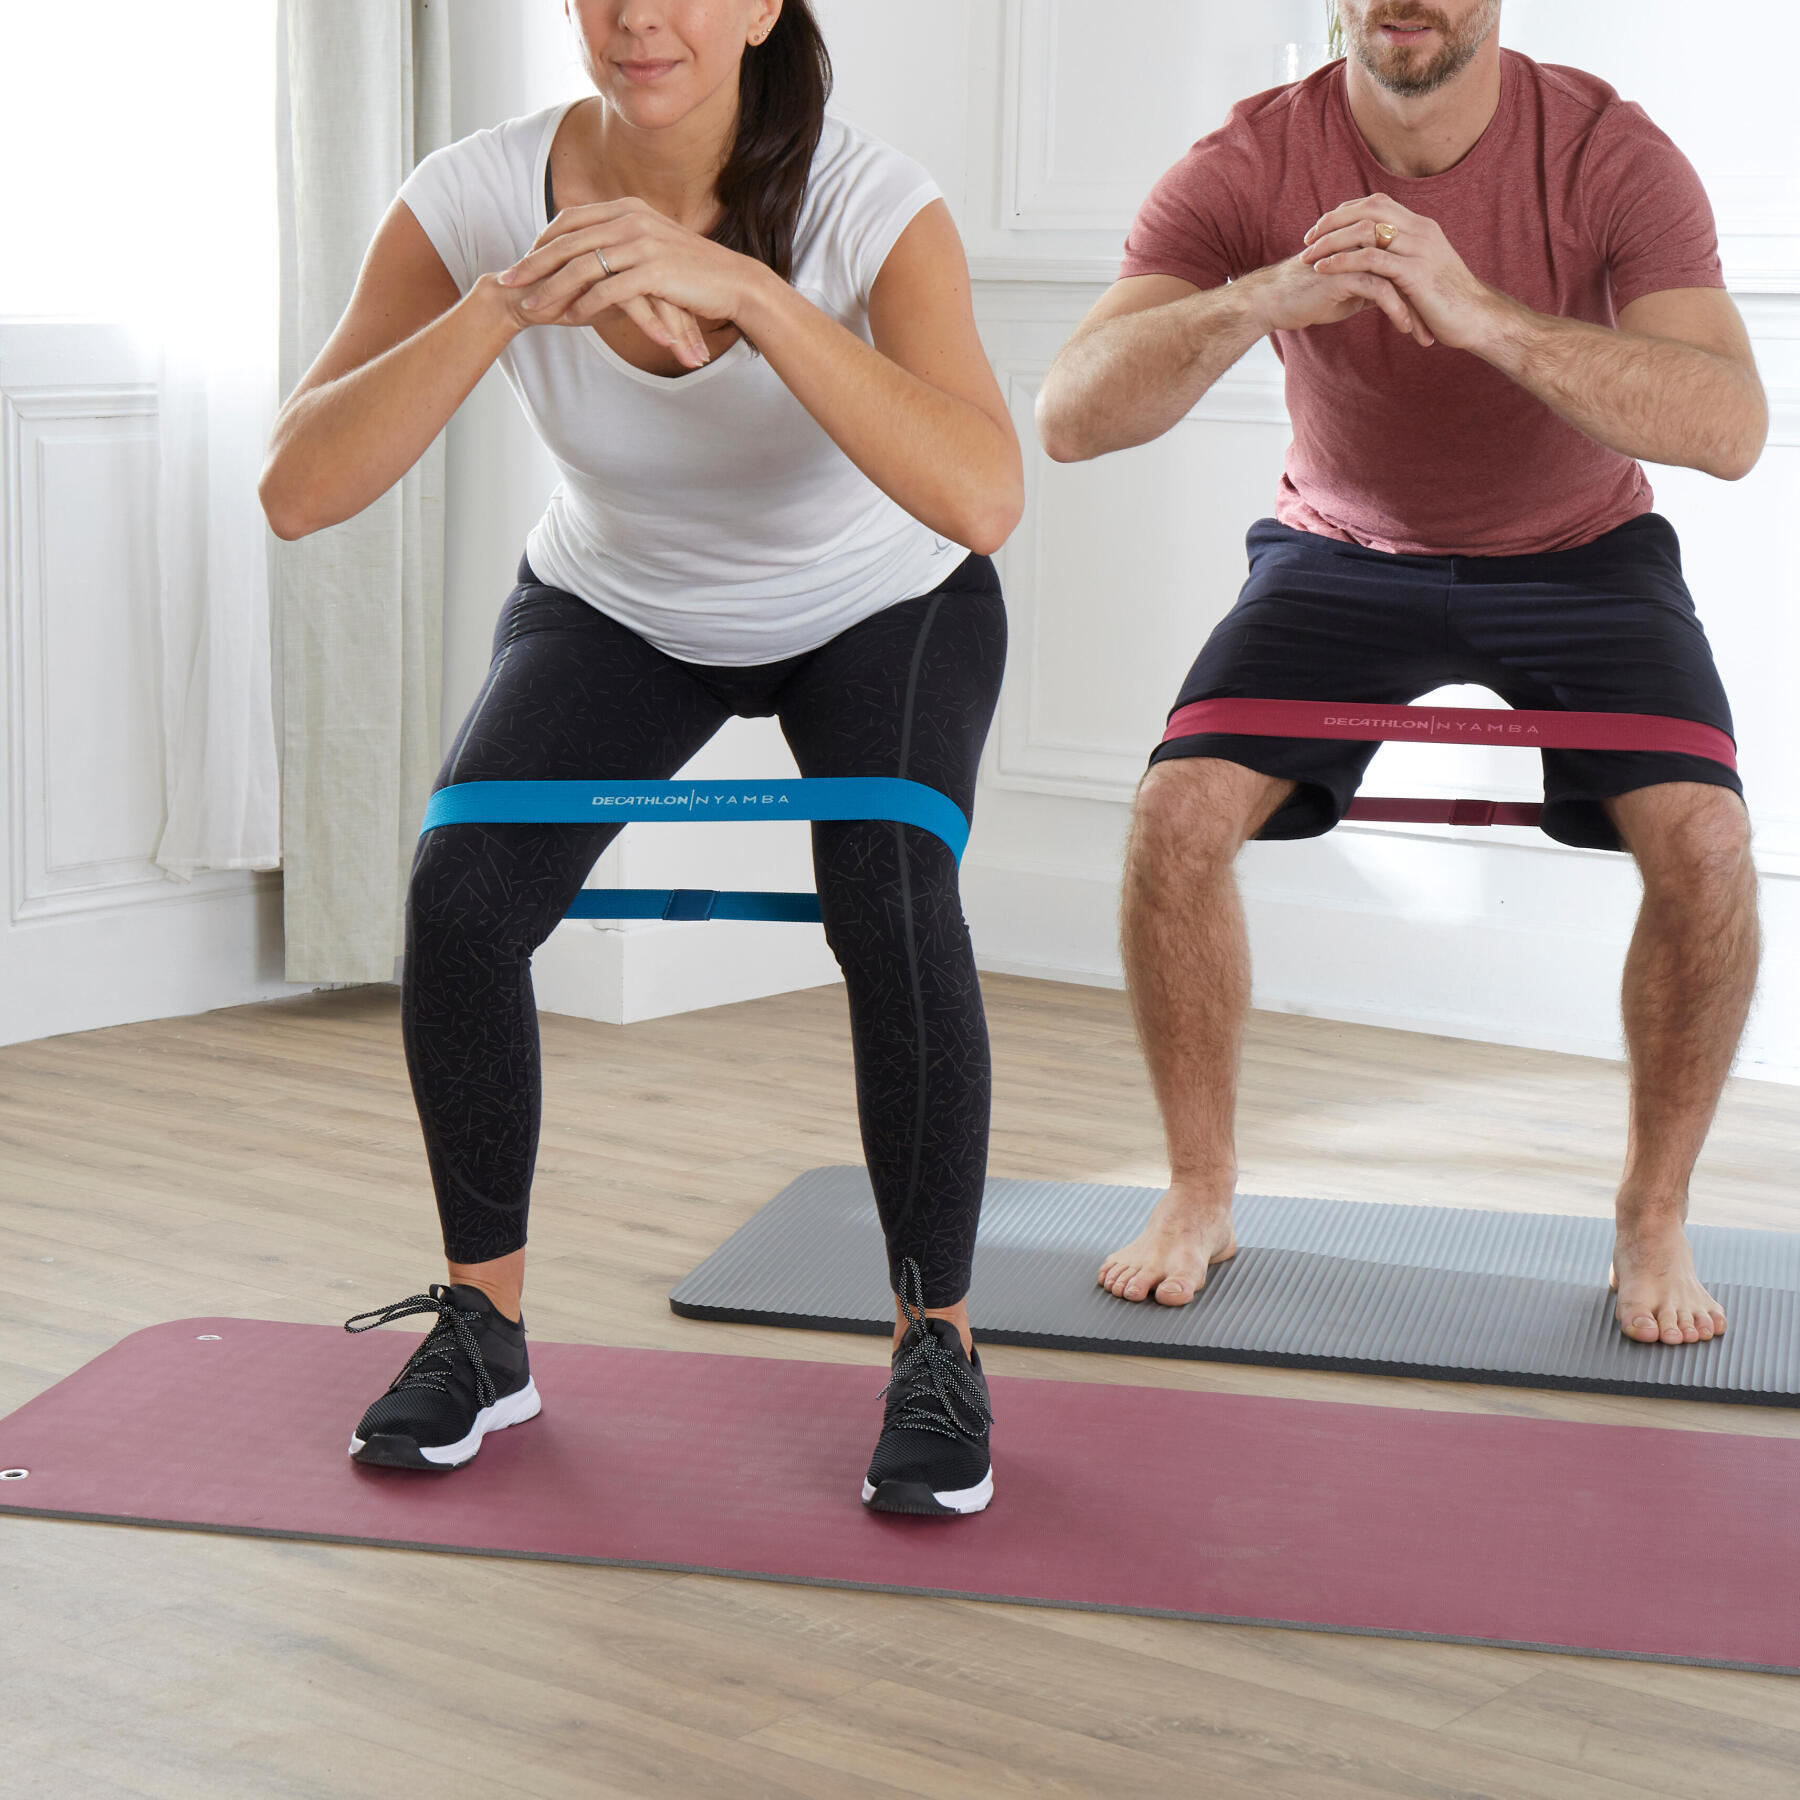 8 Exercises On Your Fitness Mat (No Other Equipment Required!)